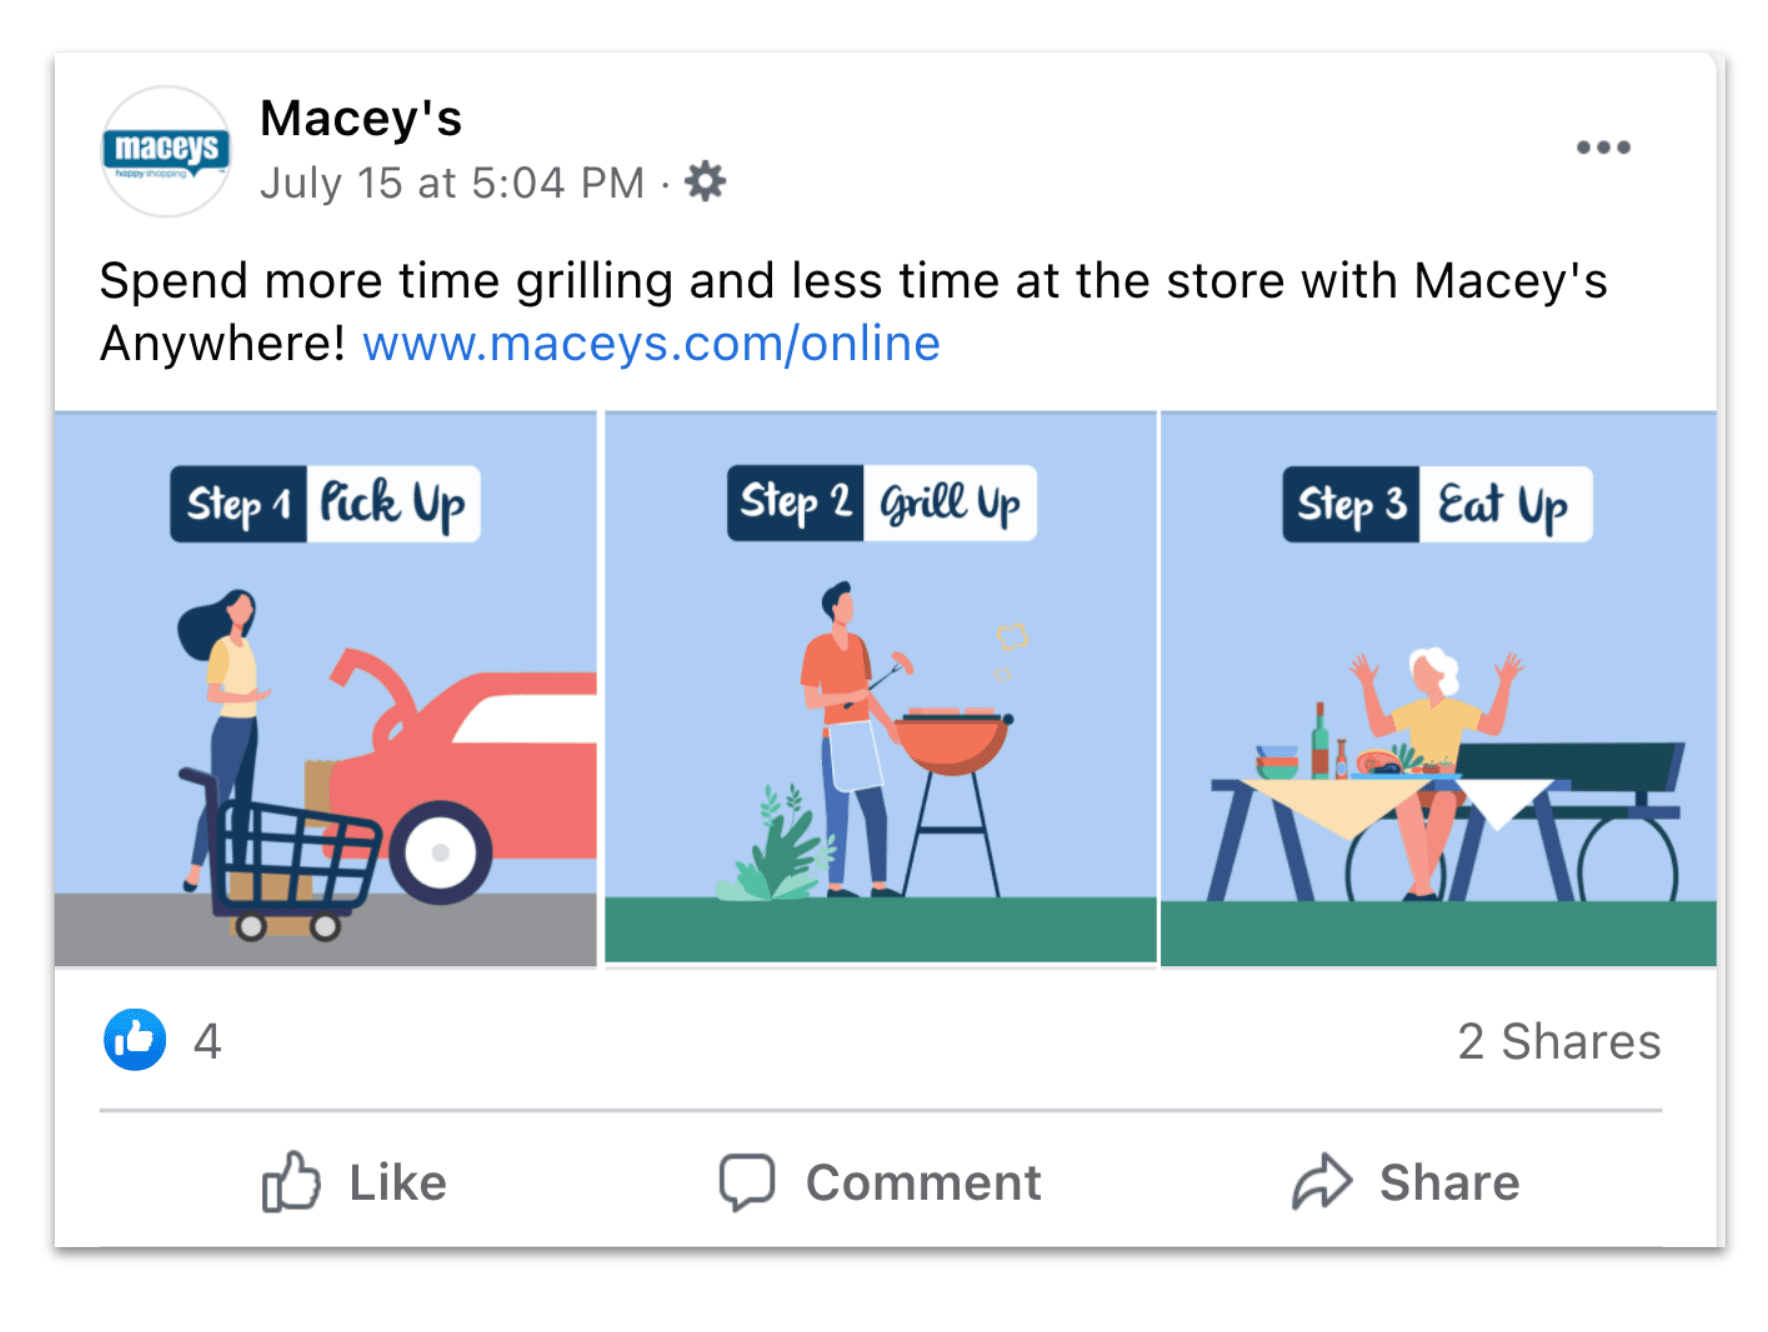 Image of Macey's Facebook post with three infographics depicting the three steps of online ordering: 1. Pick up 2. Grill up 3. Eat up